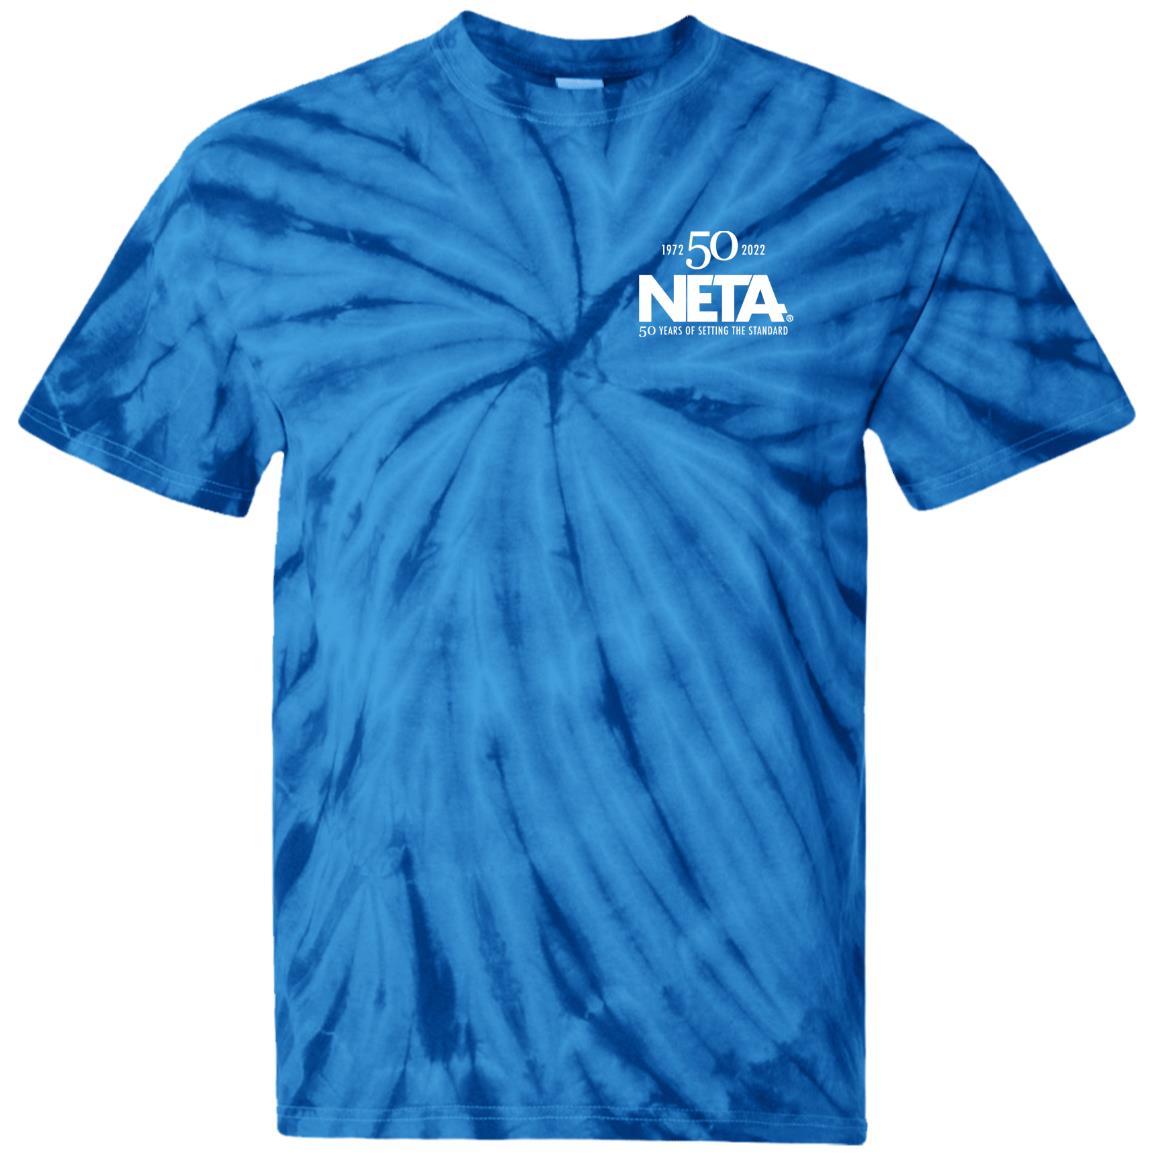 Limited Edition 50th Anniversary Tie-Dyed T-Shirt